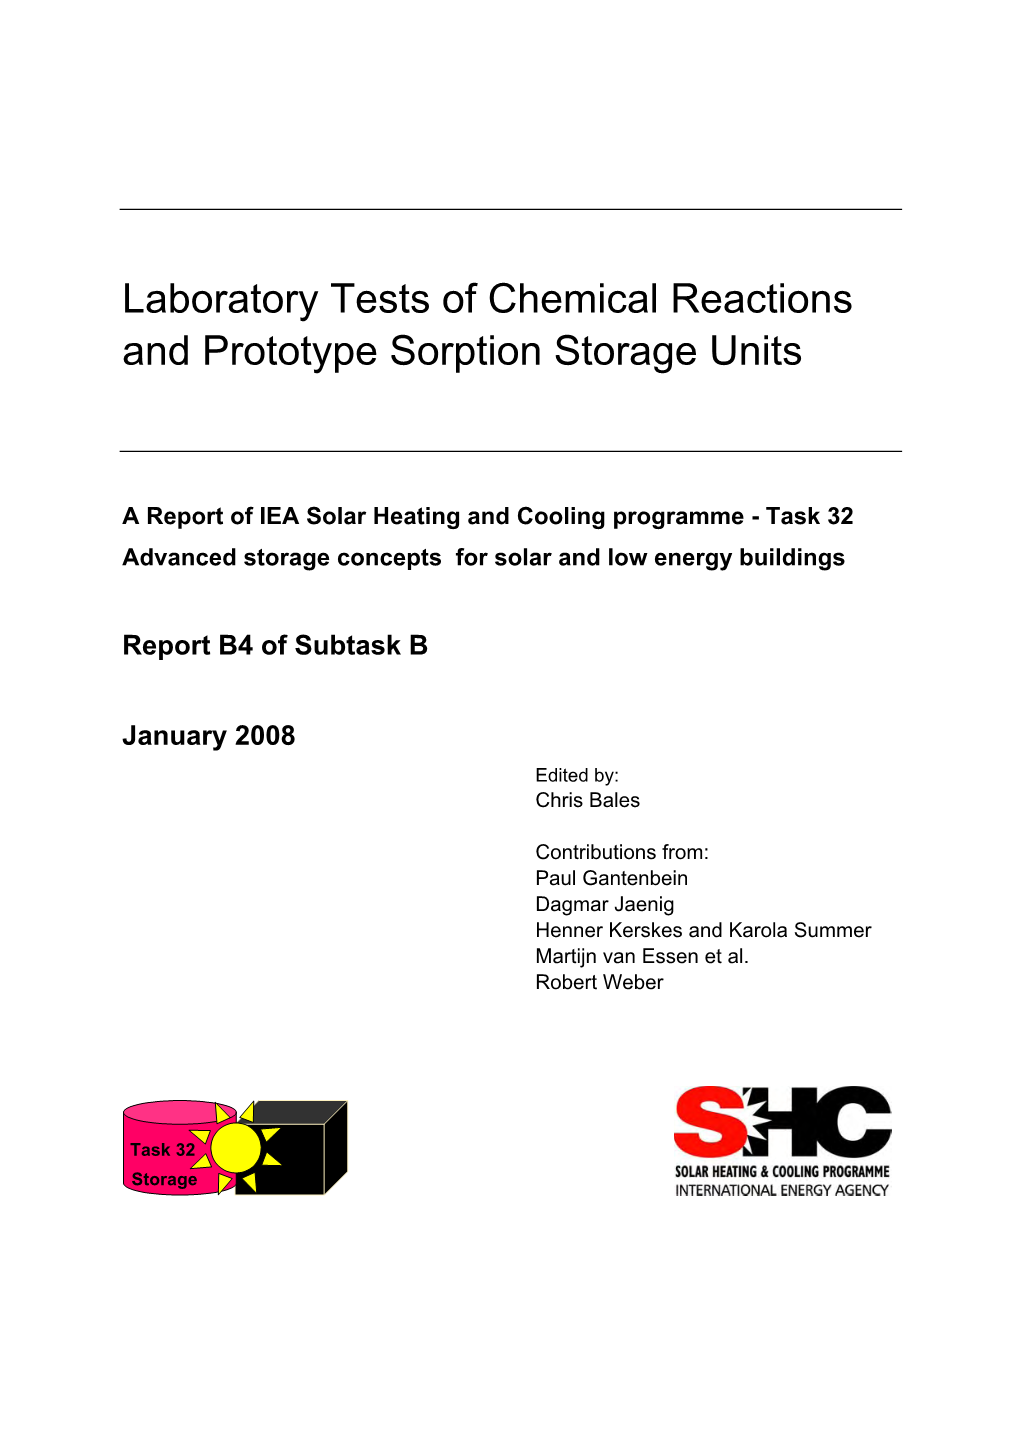 Laboratory Tests of Chemical Reactions and Prototype Sorption Storage Units